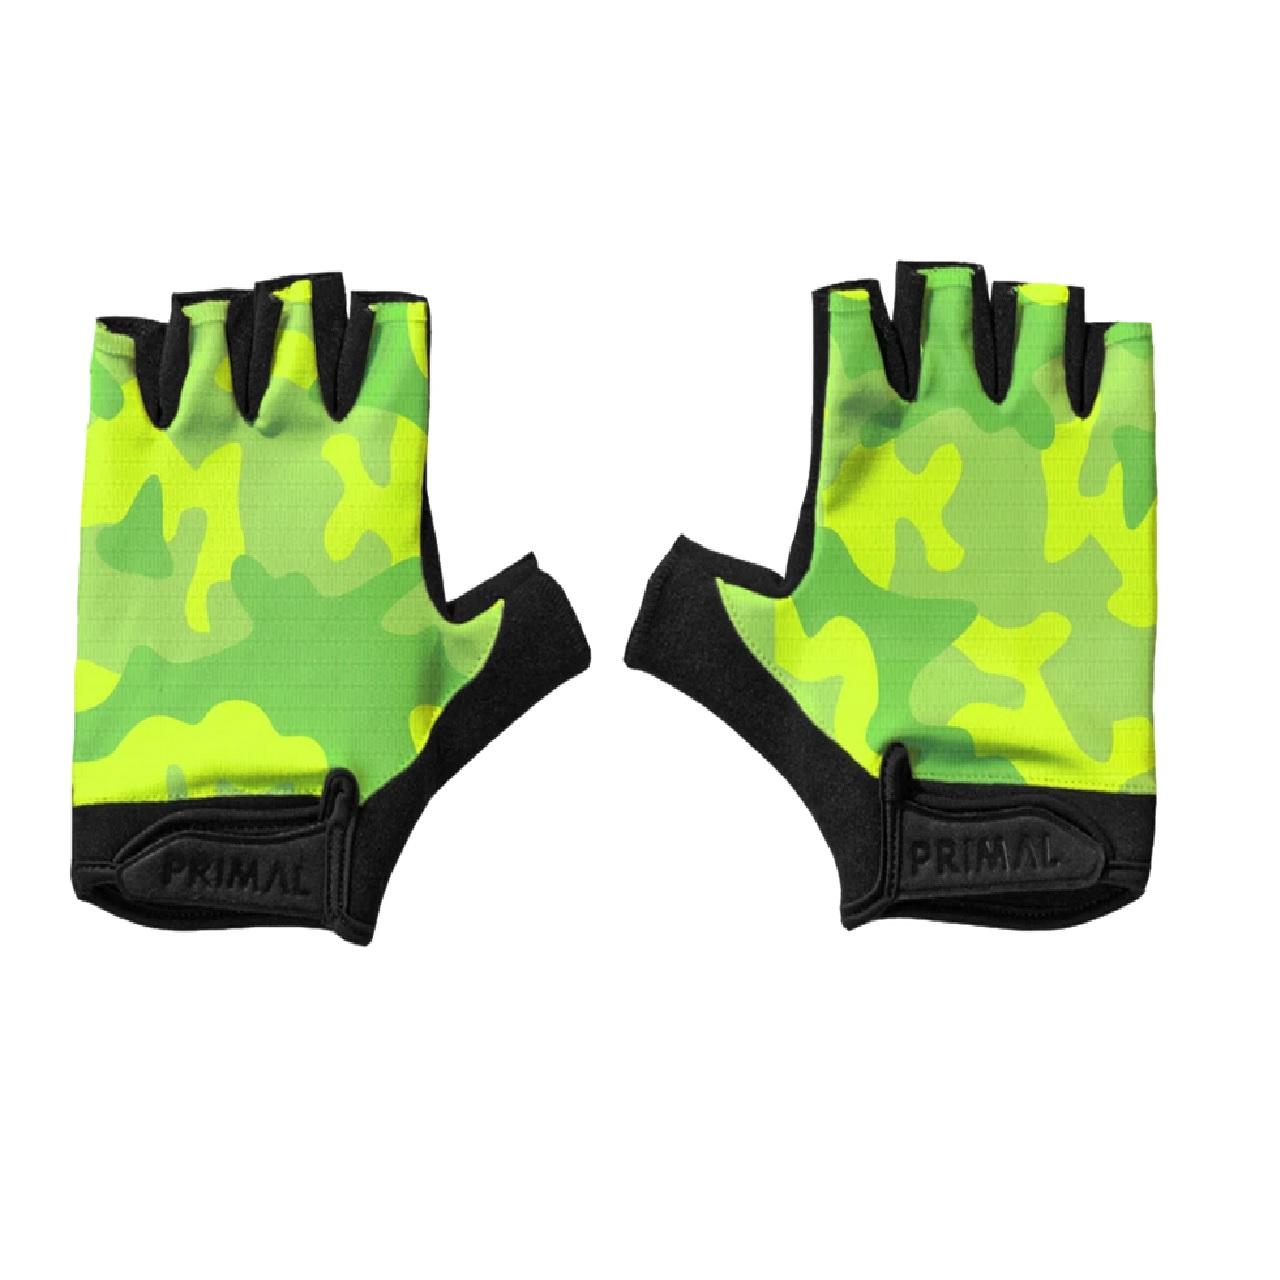 Primal Wear Neon Camo Short Finger Padded Cycling Gloves